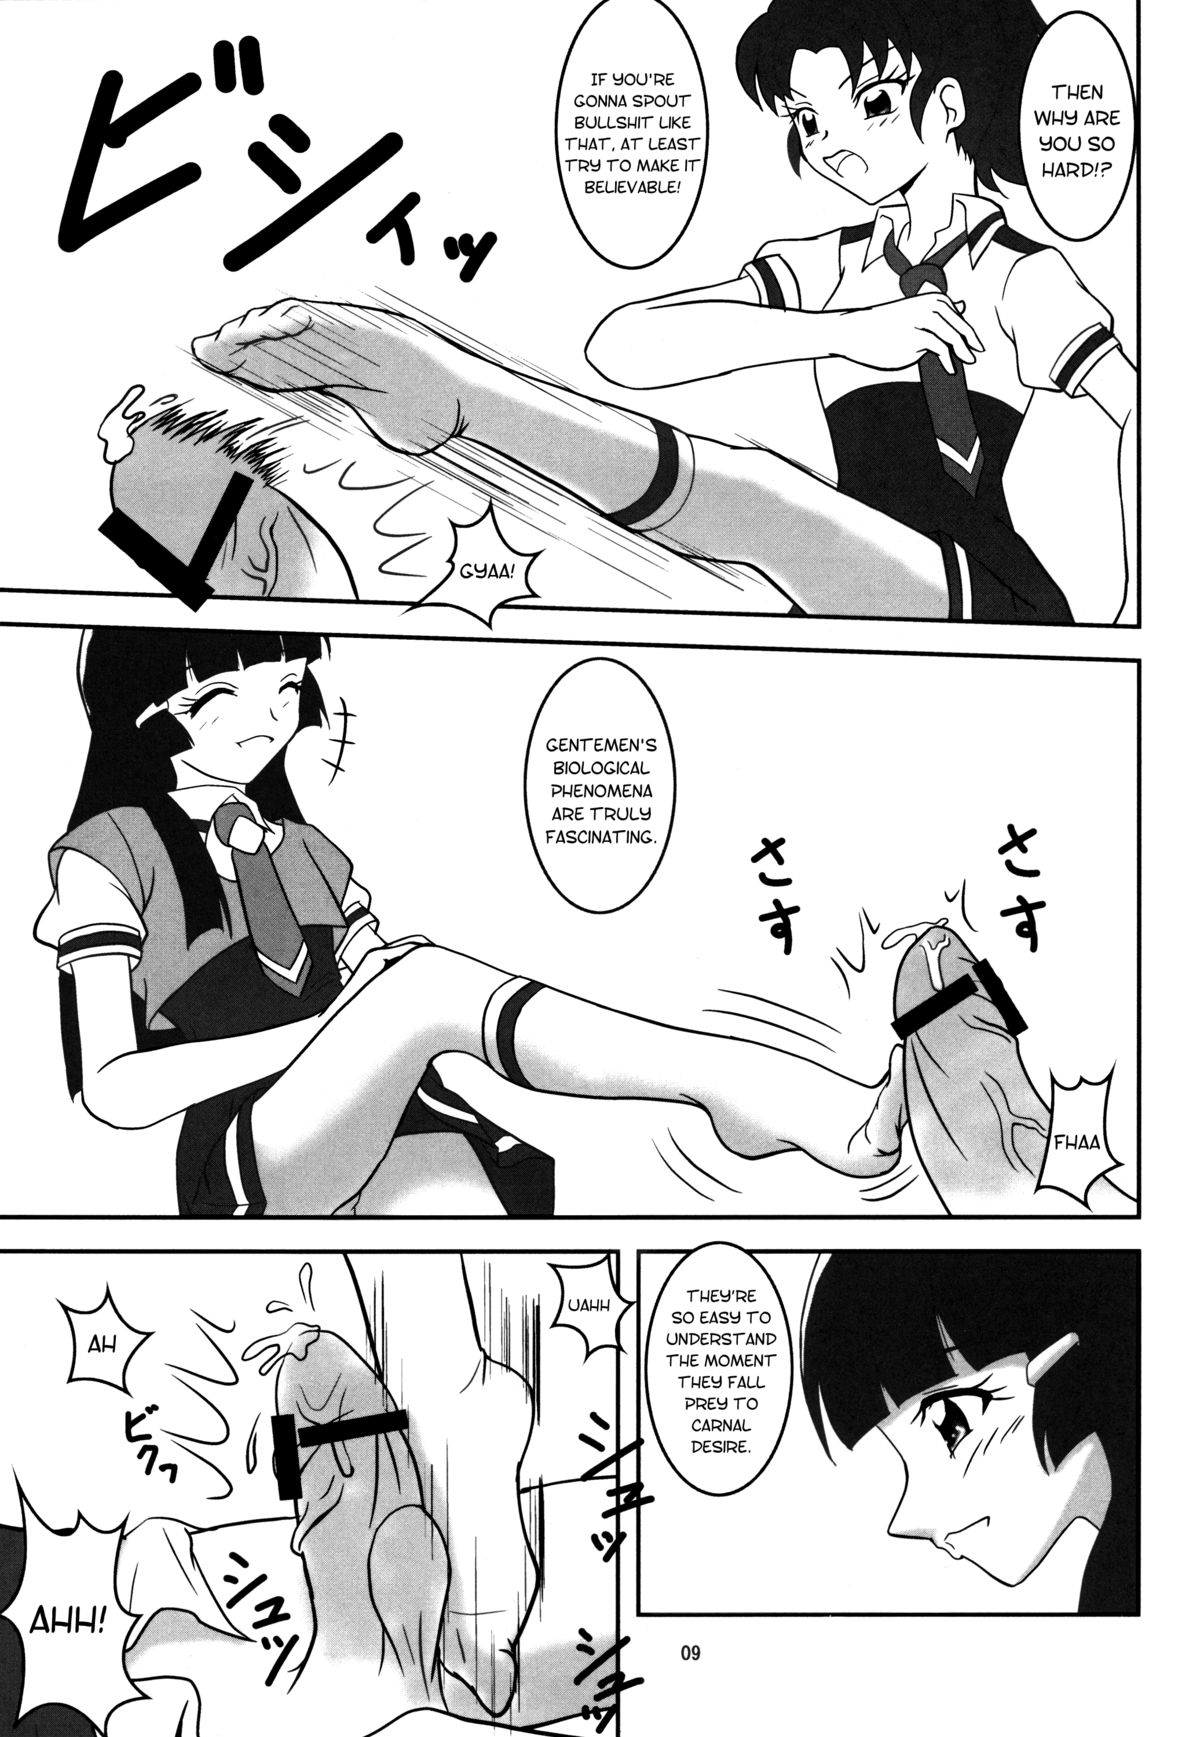 (C82) [AFJ (Ashi_O)] Smell Zuricure | Smell Footycure (Smile Precure!) [English] page 10 full